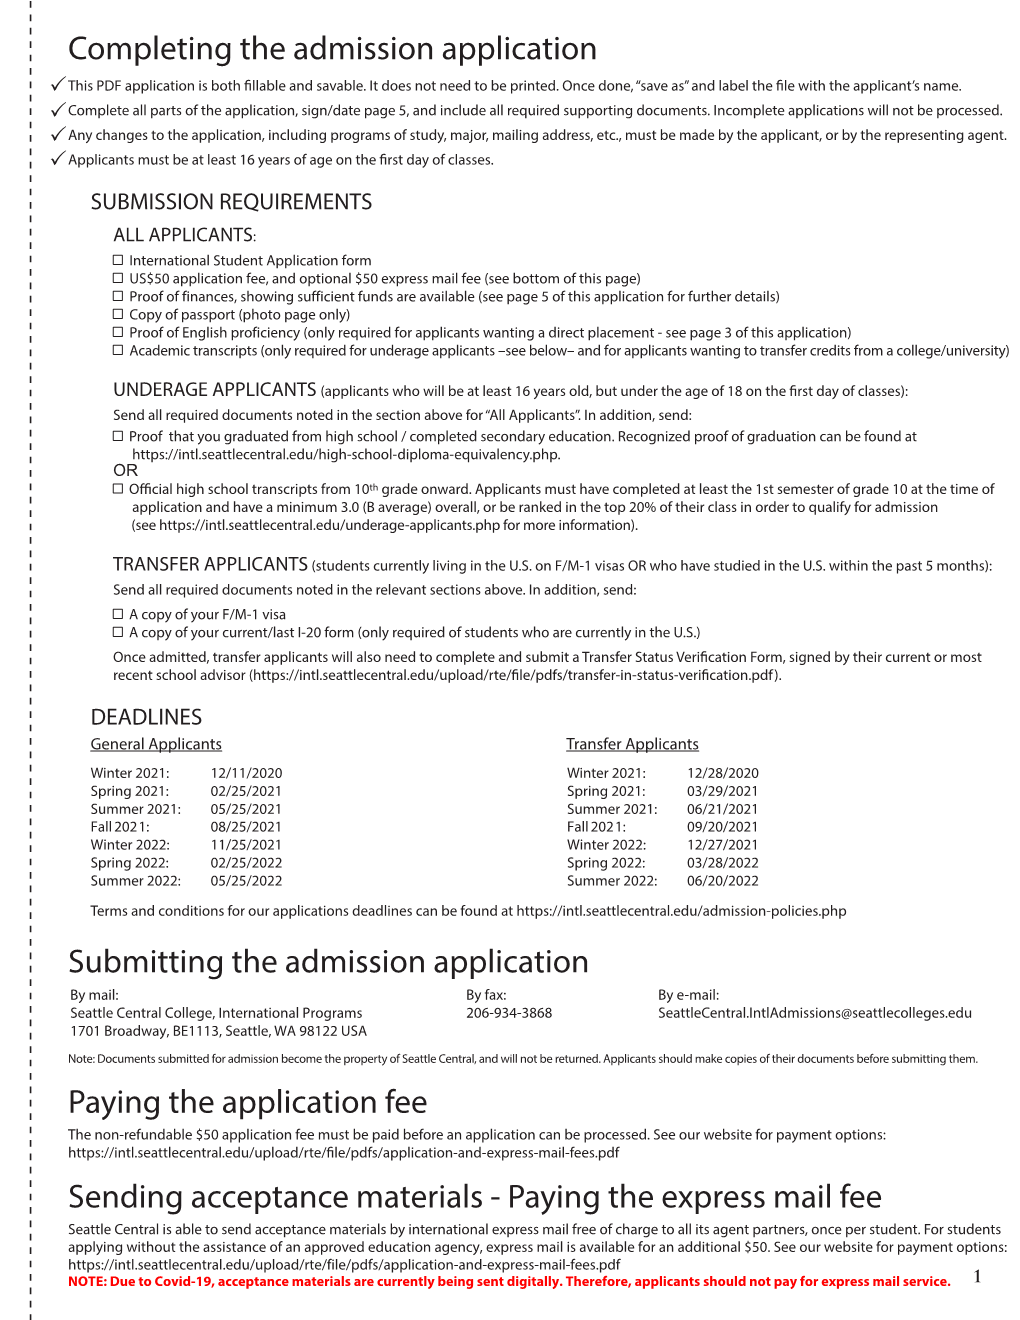 Completing the Admission Application Pthis PDF Application Is Both Fillable and Savable